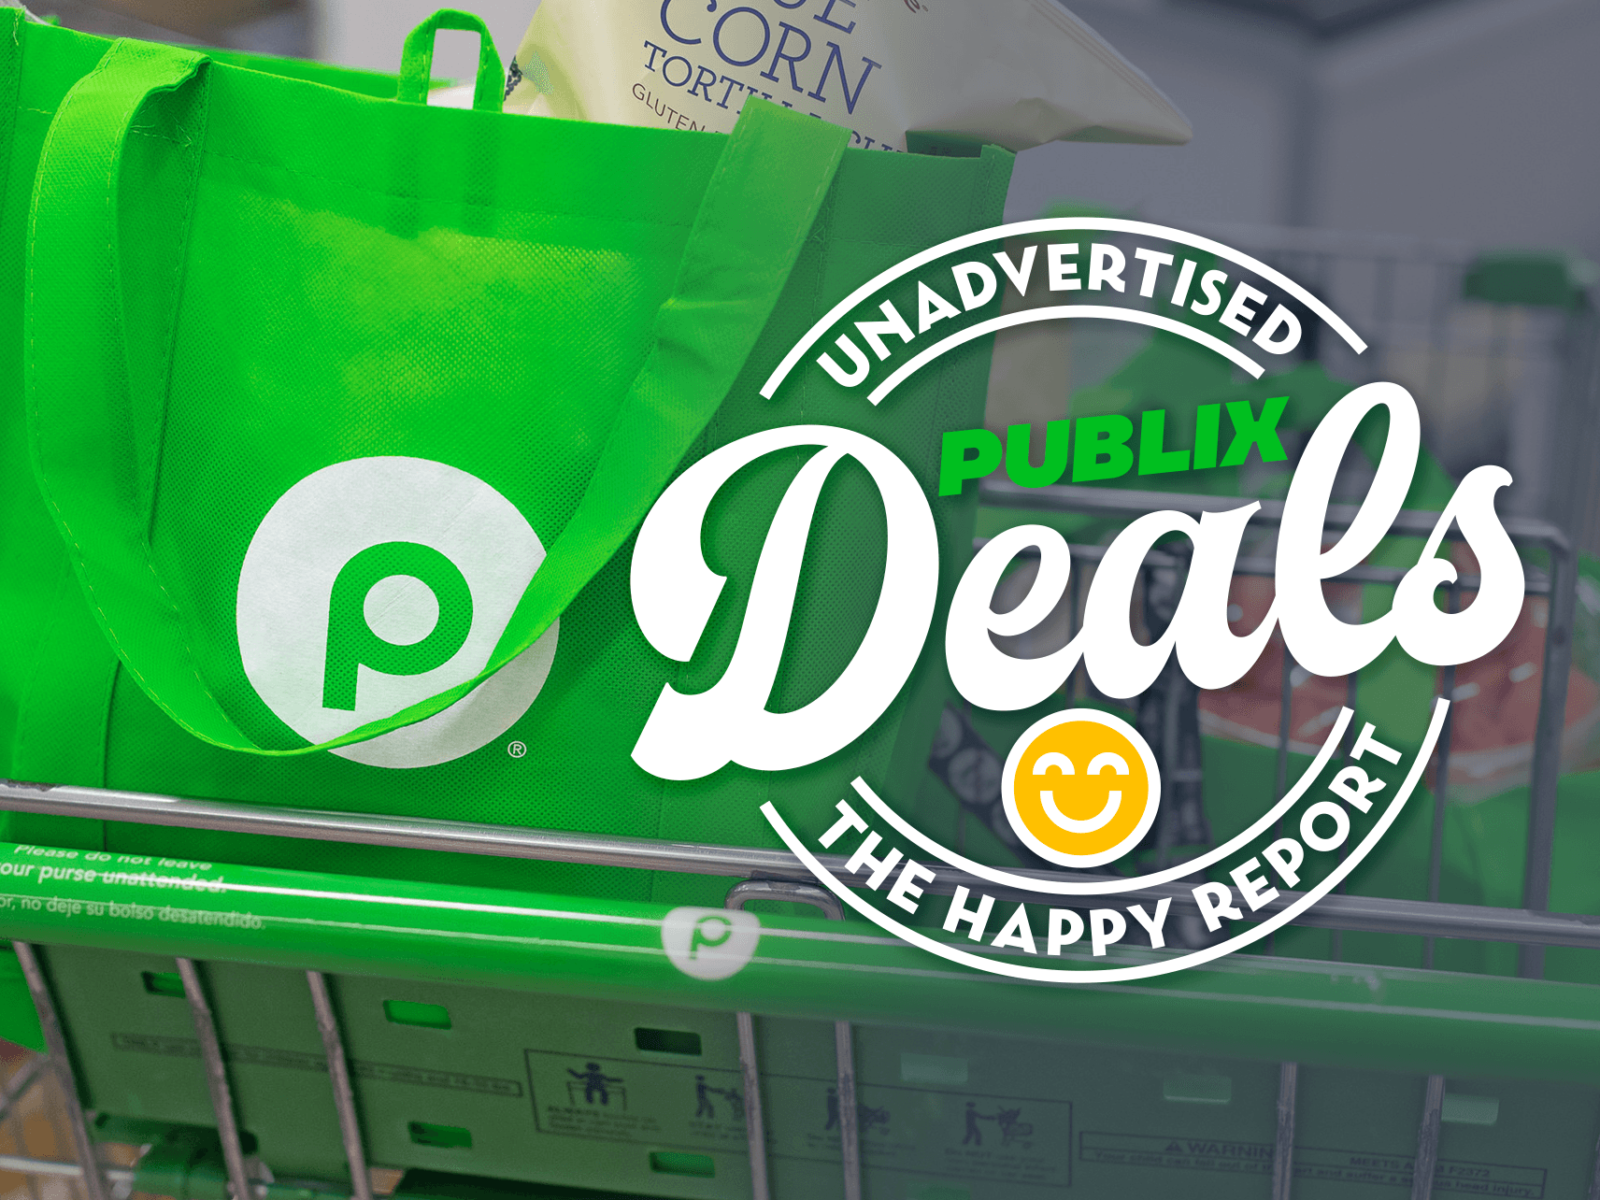 Unadvertised Publix Deals 6/28 – The Happy Report